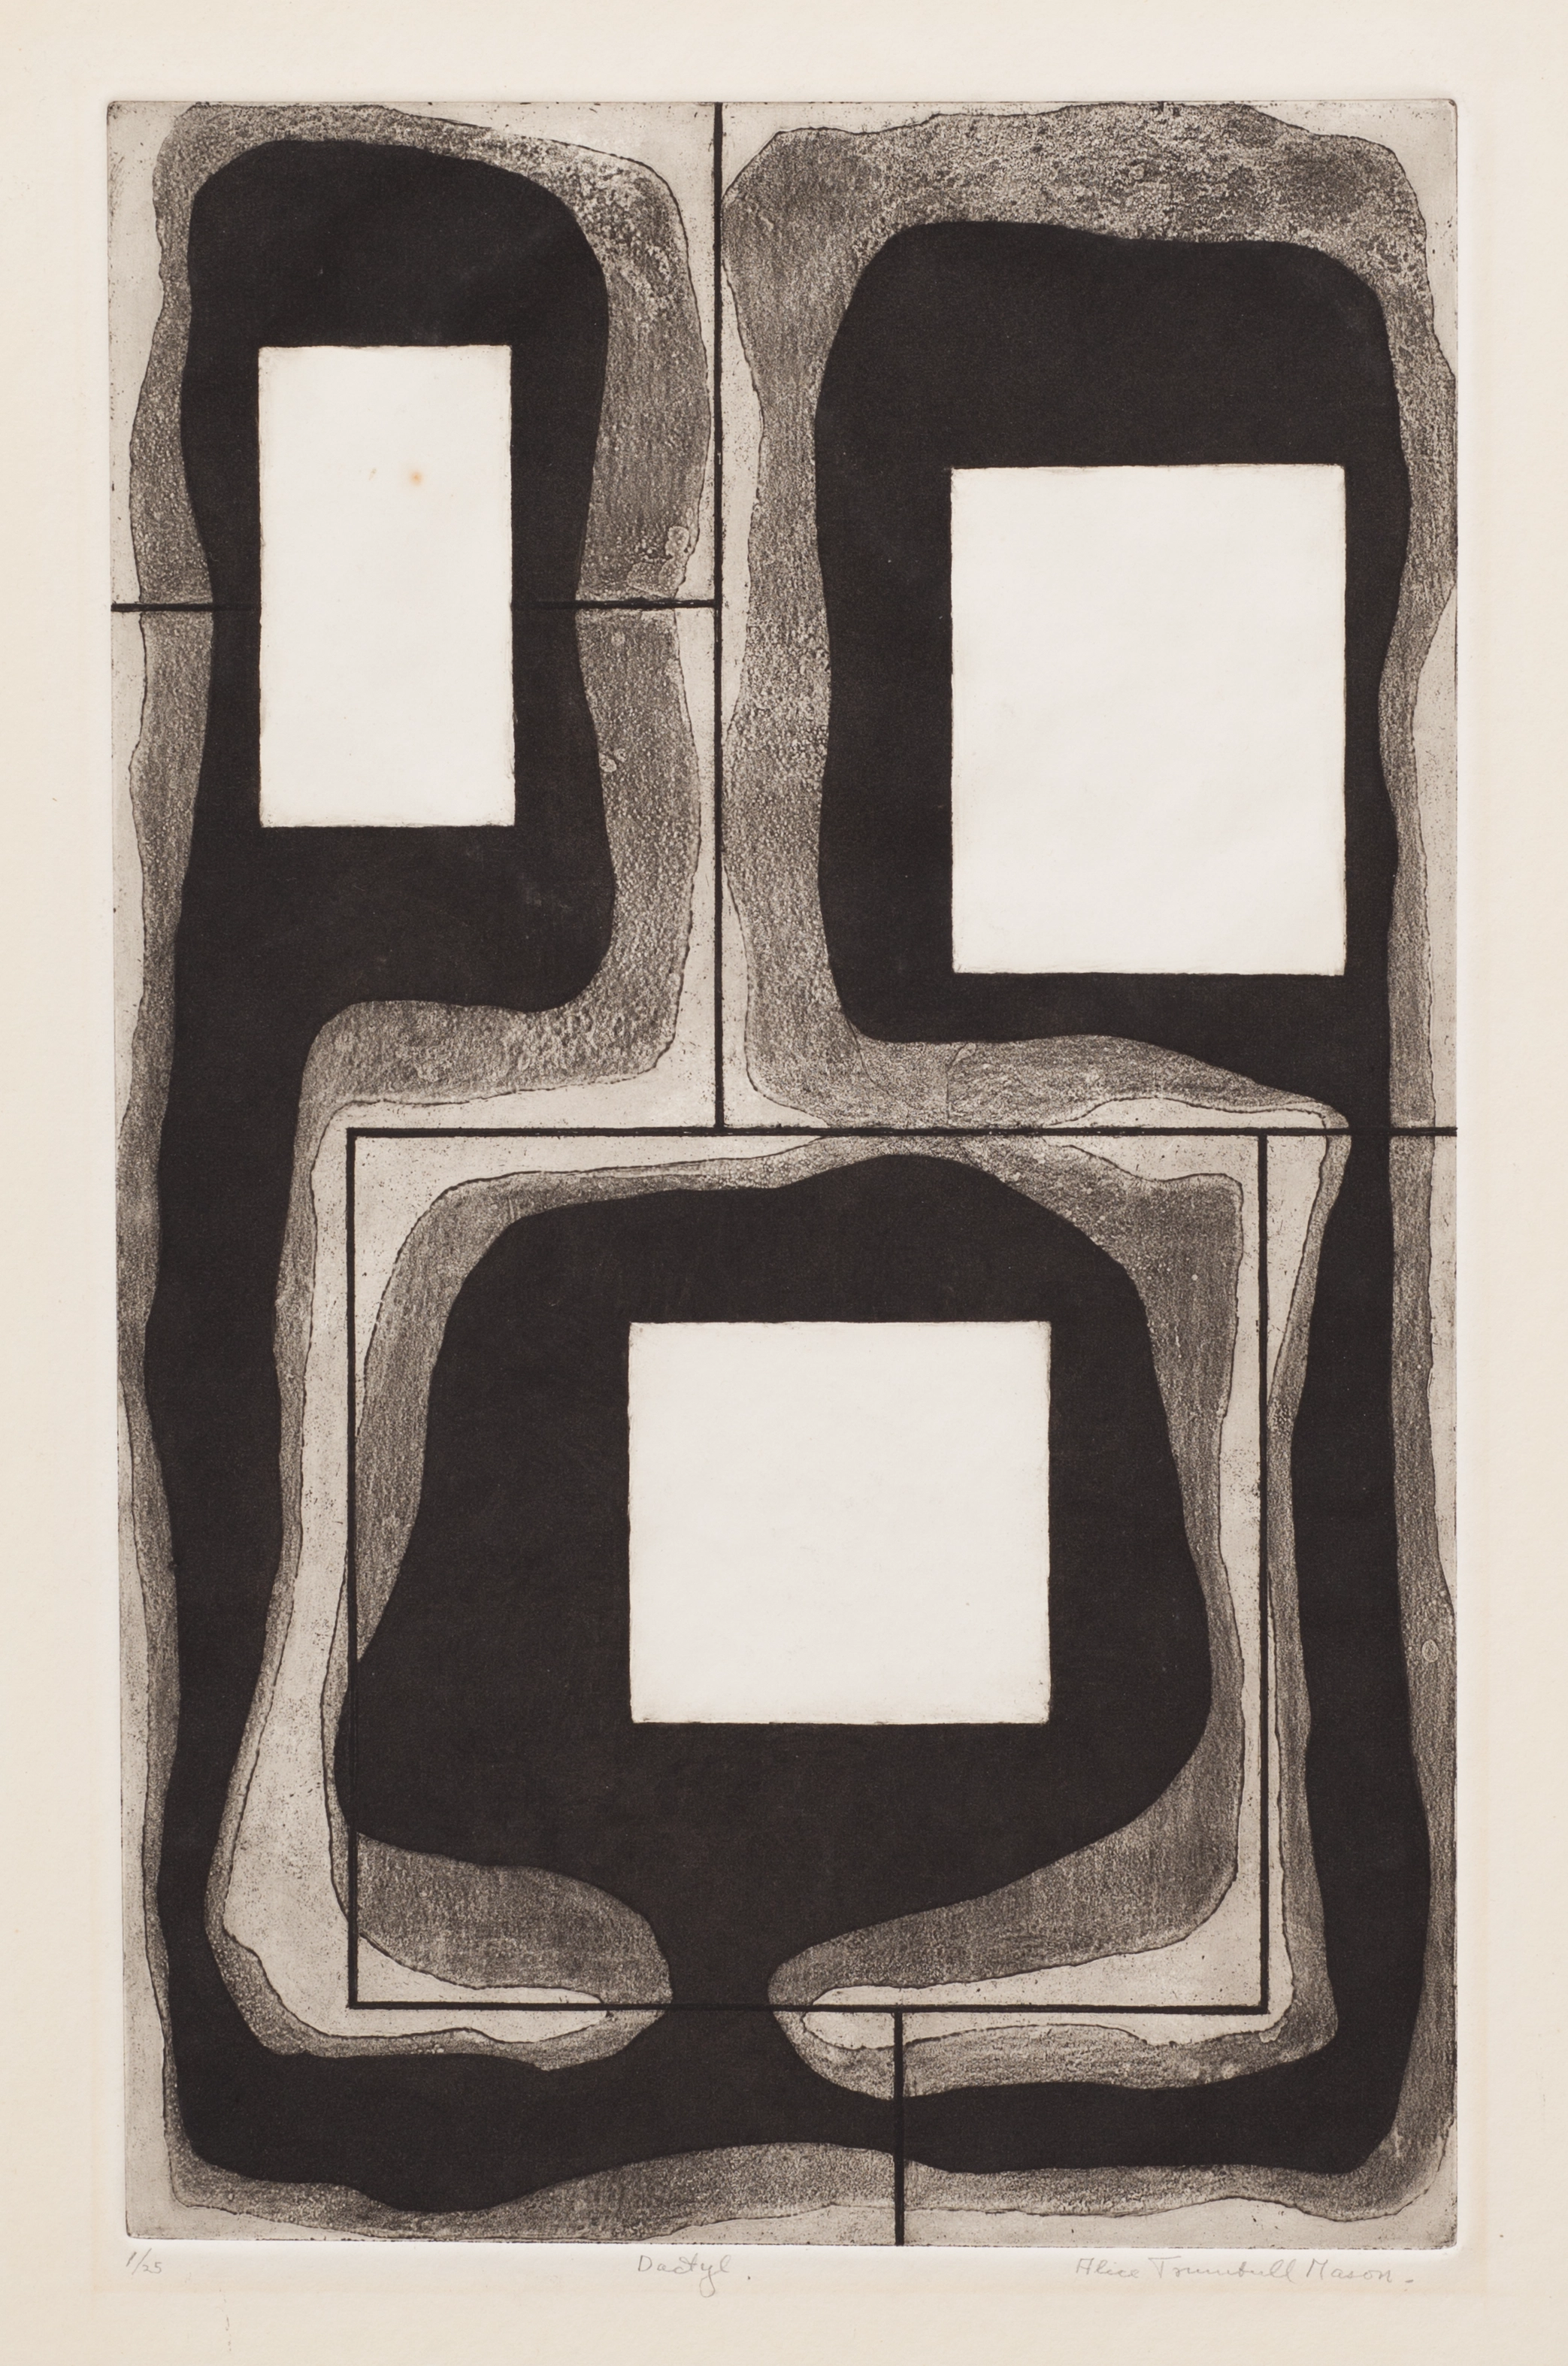 Abstract print on paper comprised of two white squares and one white rectangle in the foreground, with black and grey organic lines and forms in the background of each.